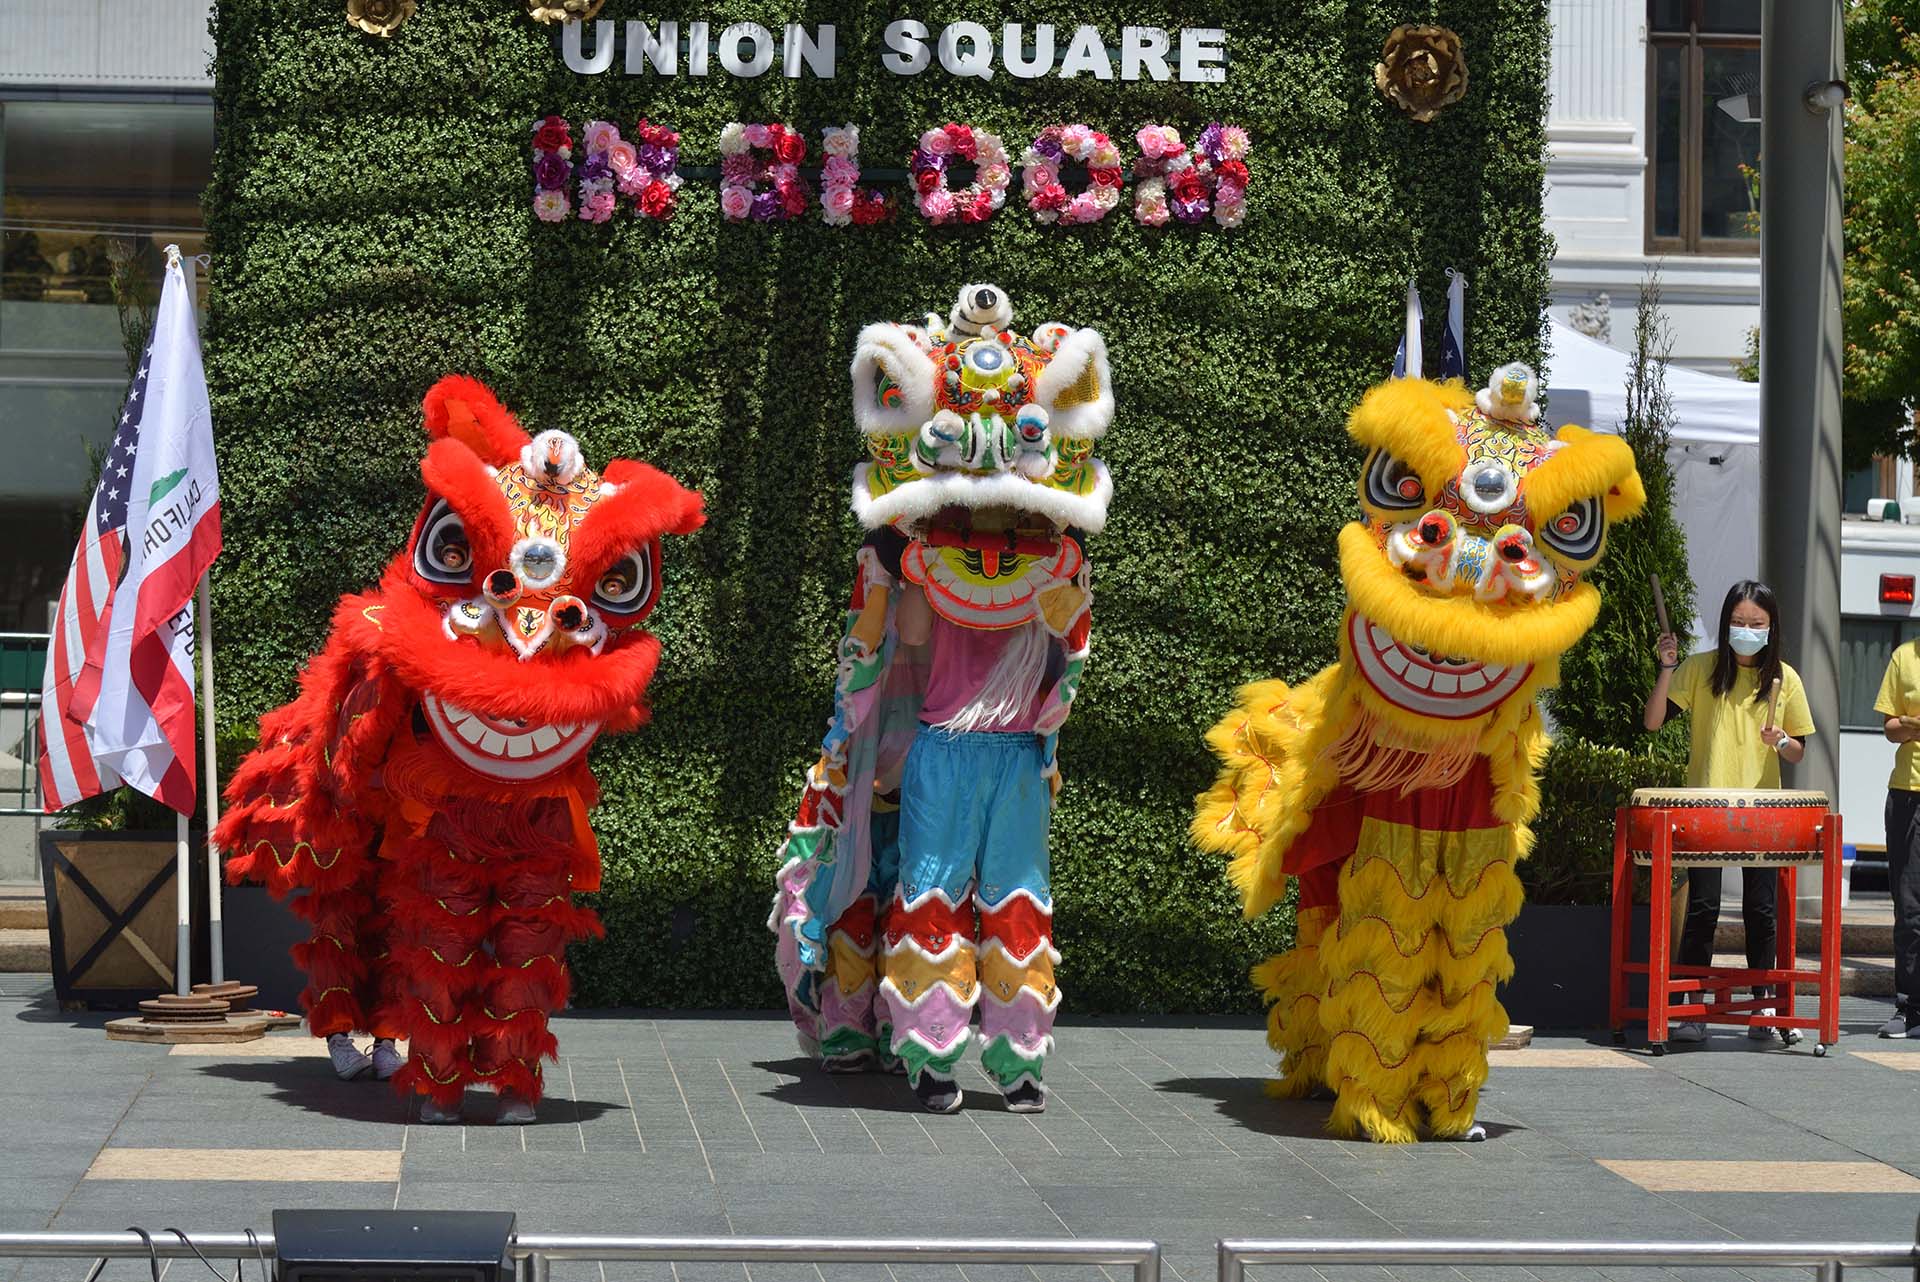 Three performers in colorful red and gold lion costumes perform a traditional lion dance.